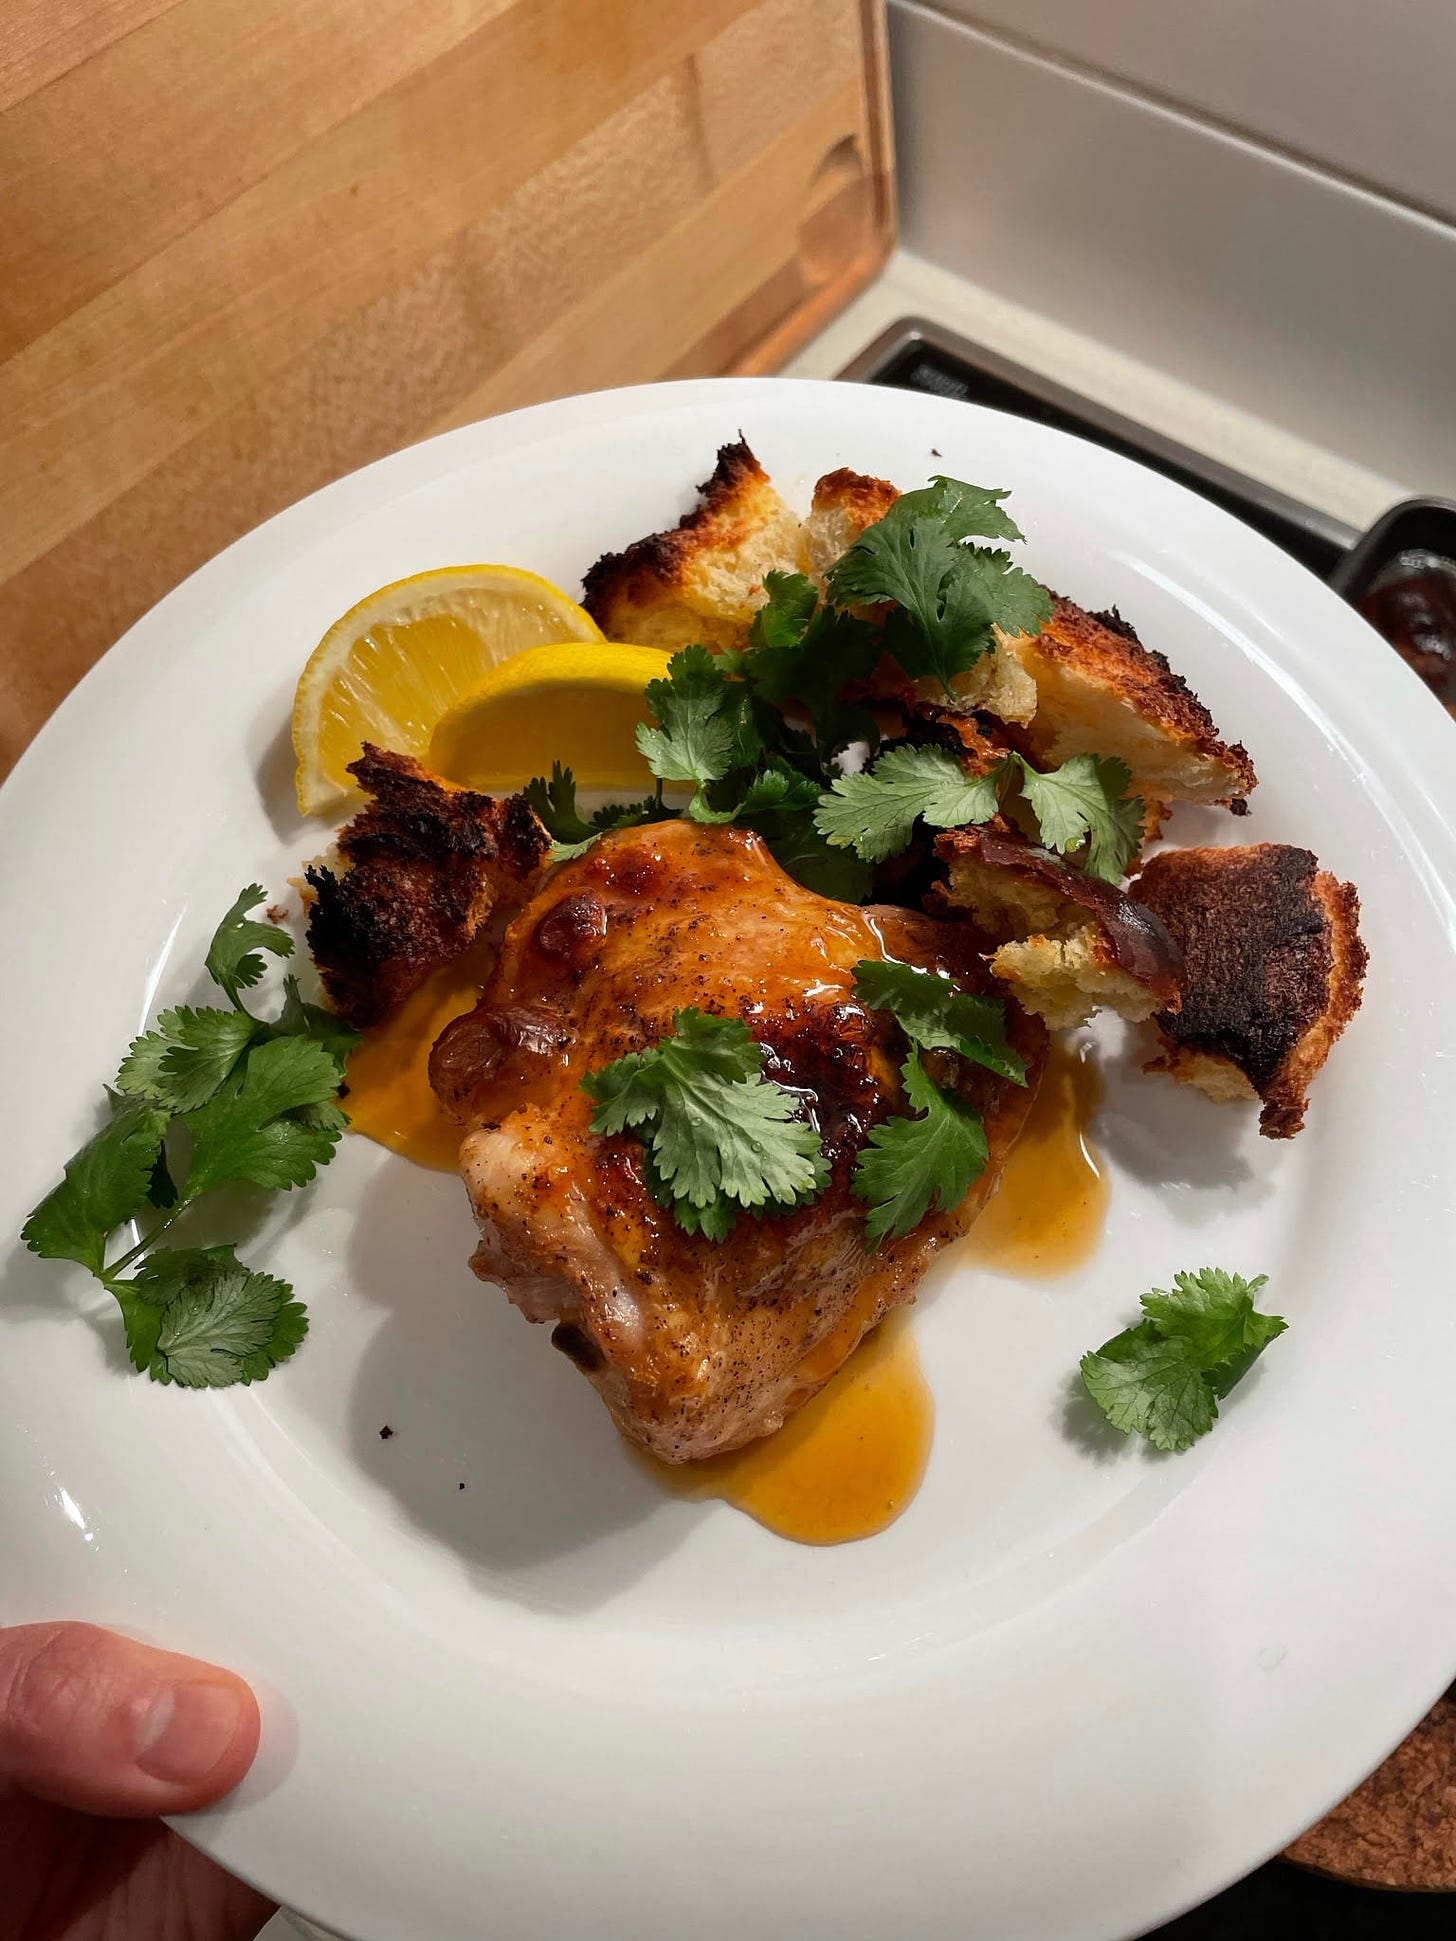 A plate of roast chicken and croutons topped with coriander and served with lemon